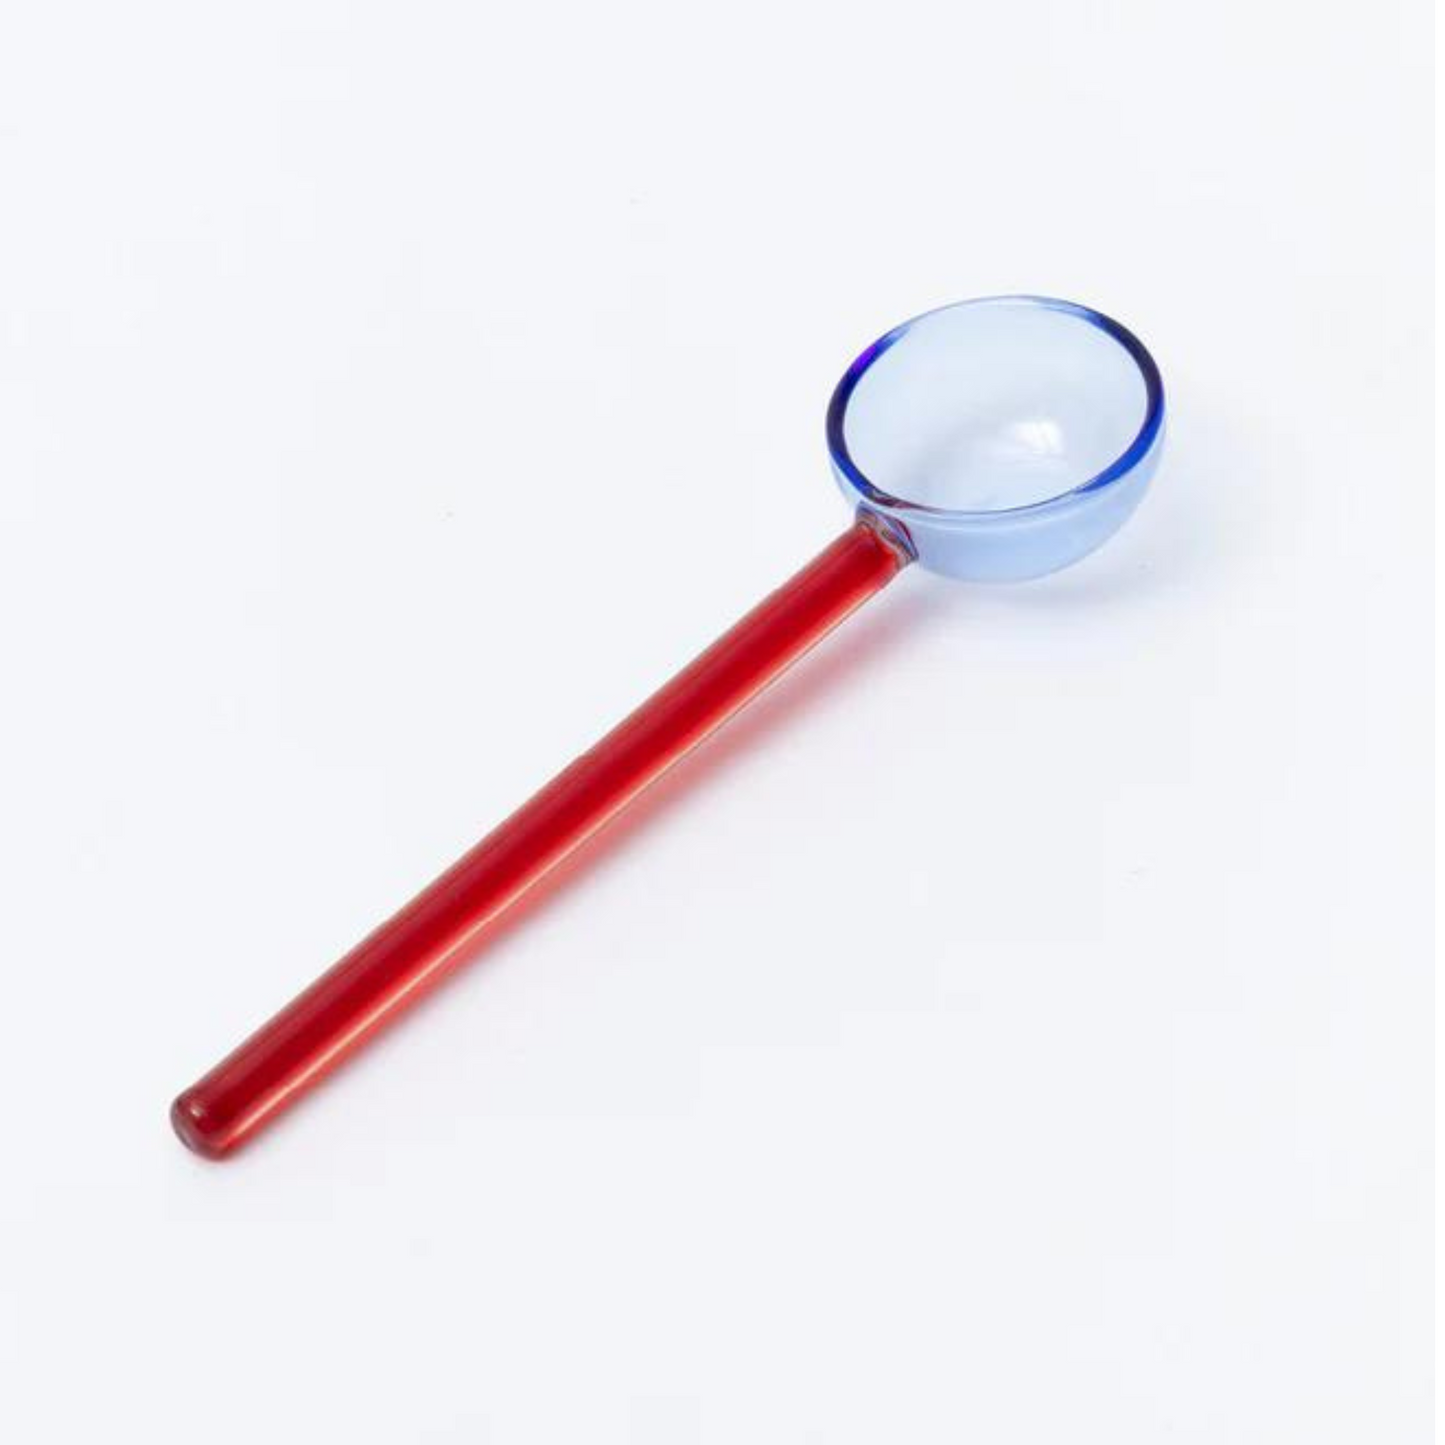 red and blue glass spoon.